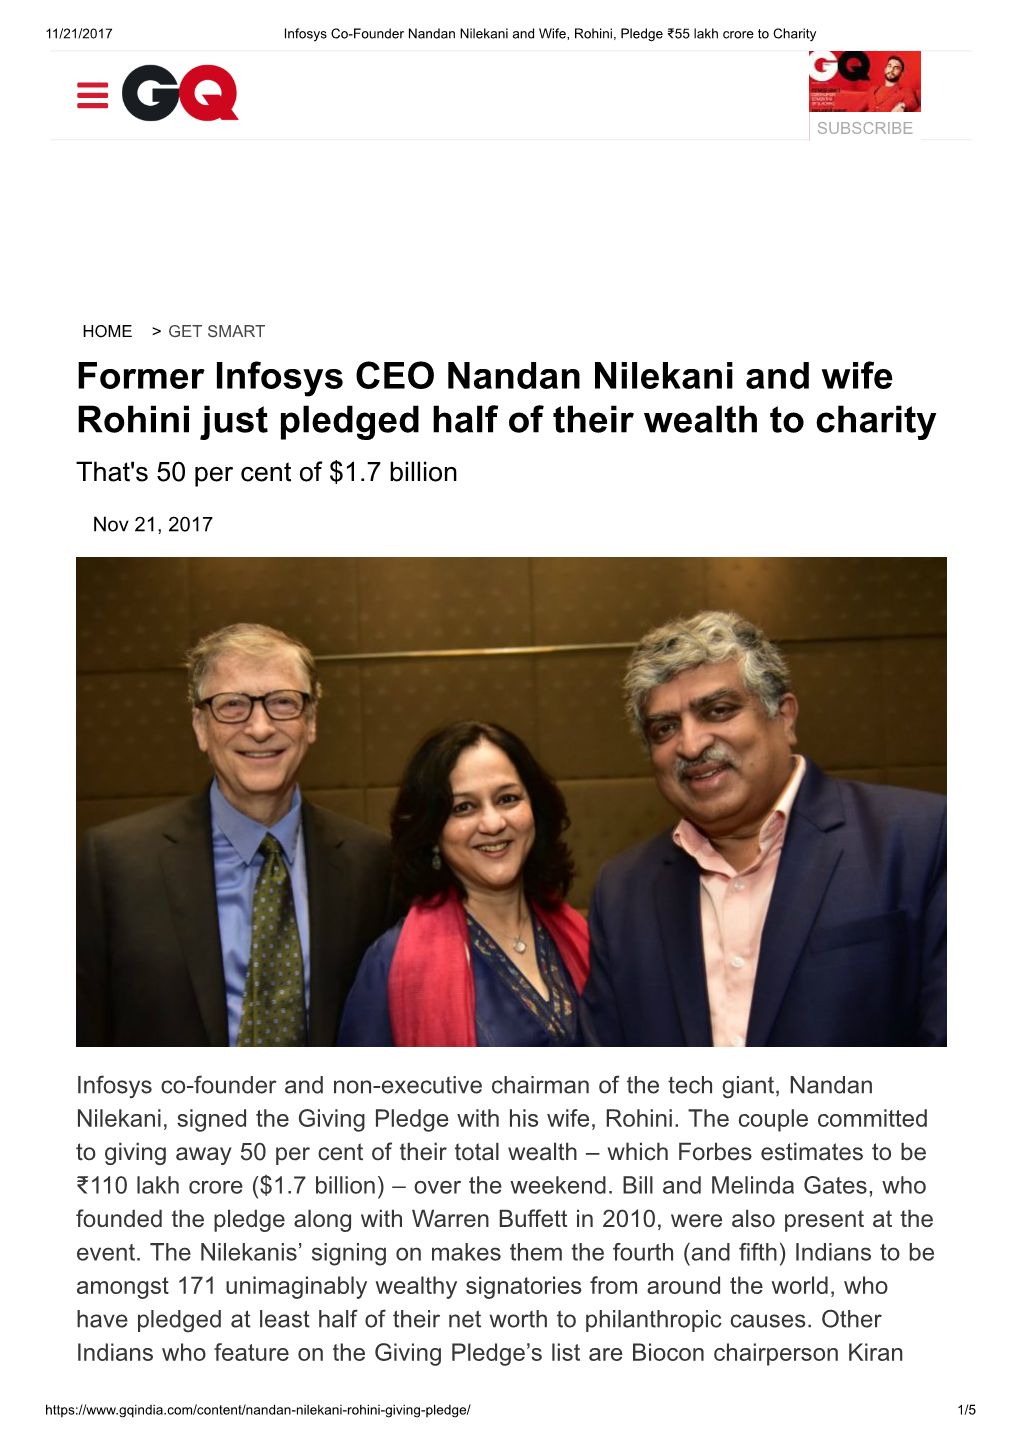 Former Infosys CEO Nandan Nilekani and Wife Rohini Just Pledged Half of Their Wealth to Charity That's 50 Per Cent of $1.7 Billion